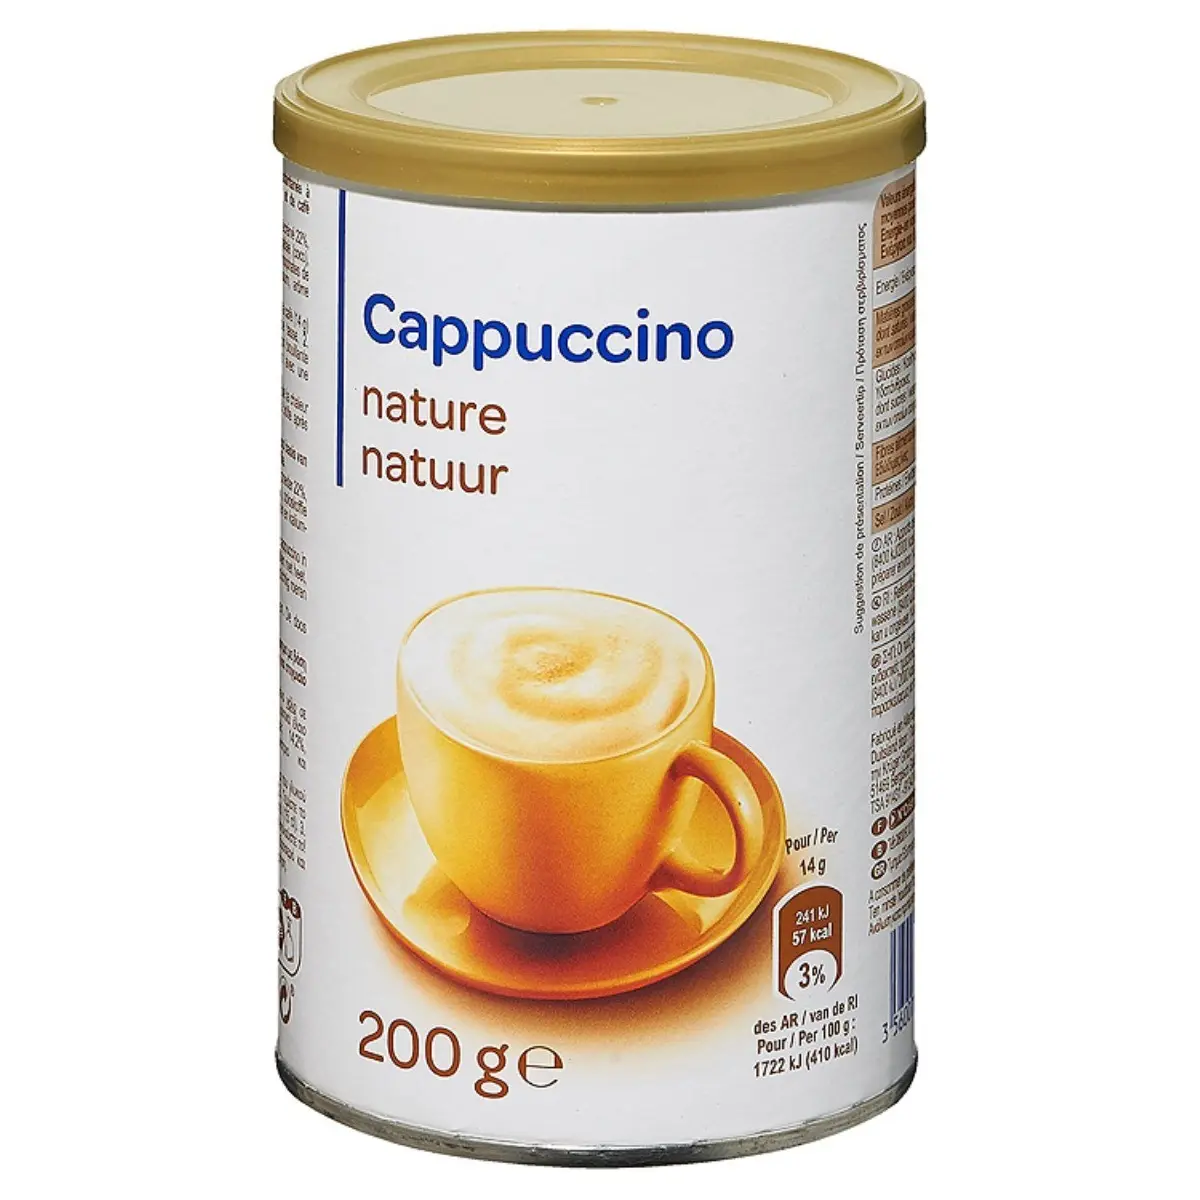 Cappuccino Carrefour, 200g